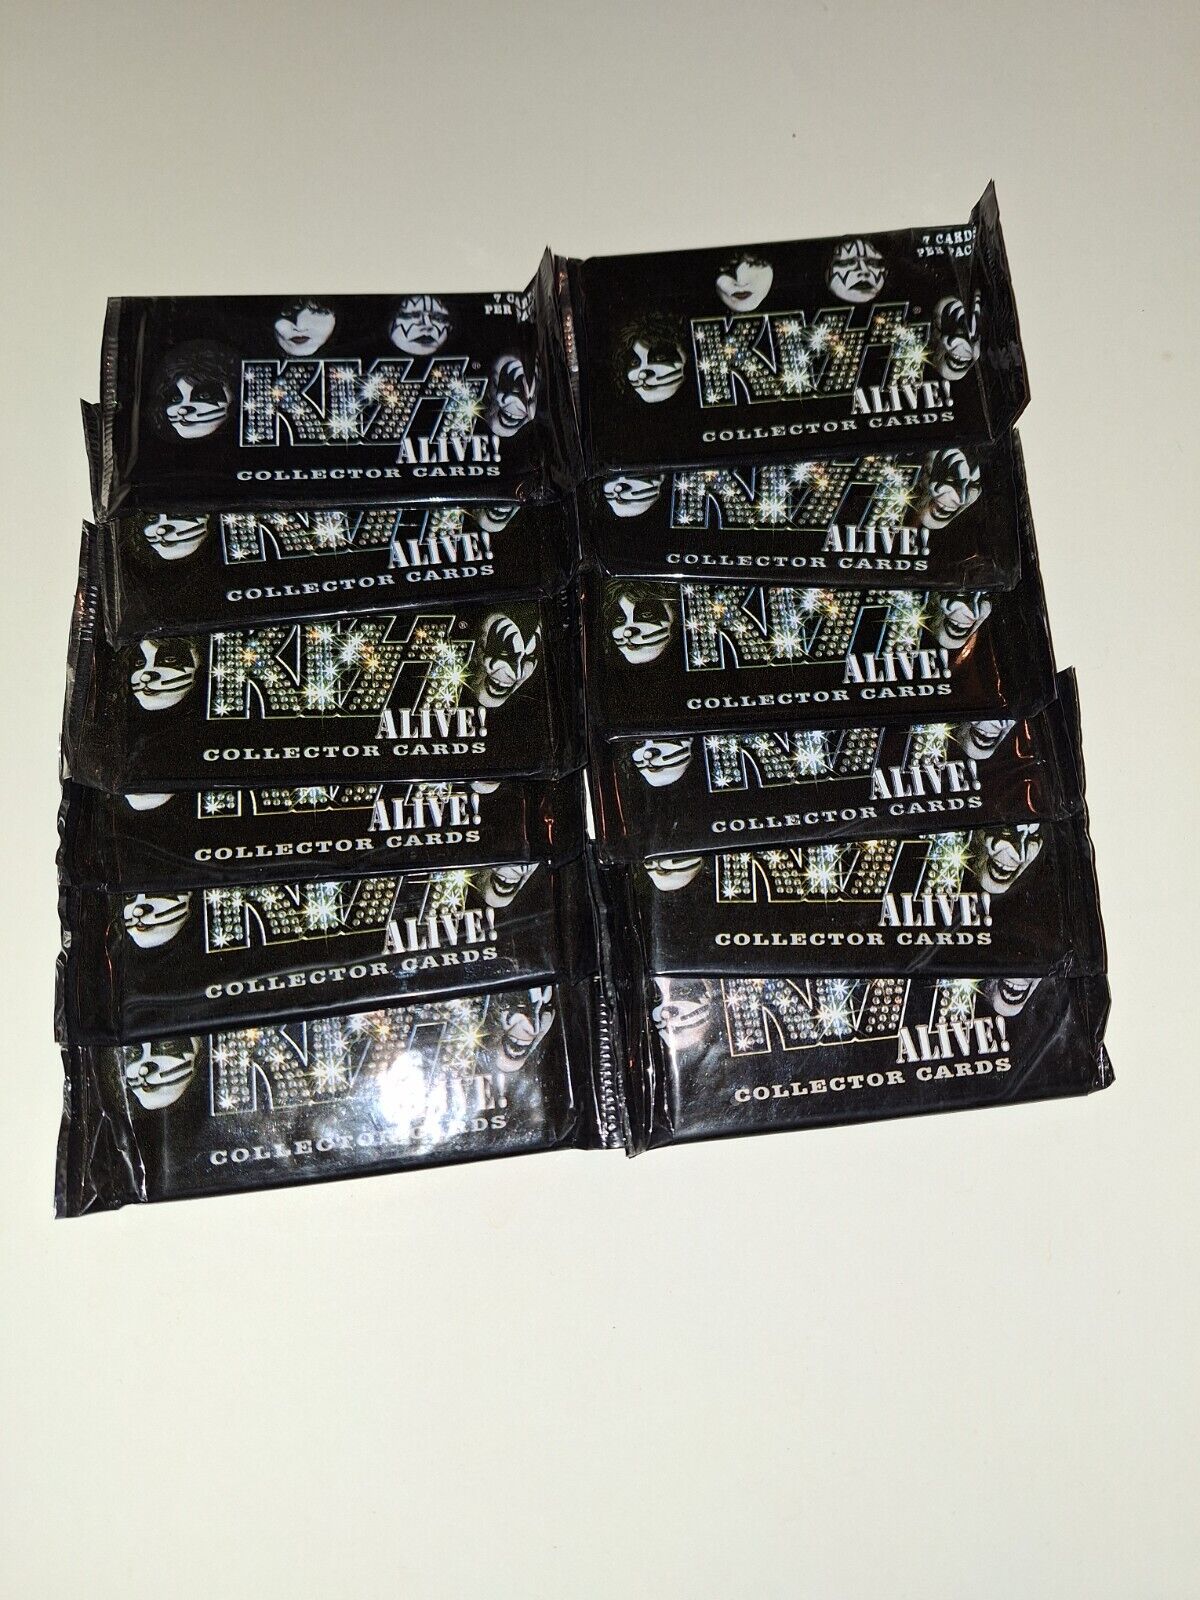 12 Unopened KISS Alive Collector Trading Card Packs; 7 Card’s Per Pack 2001